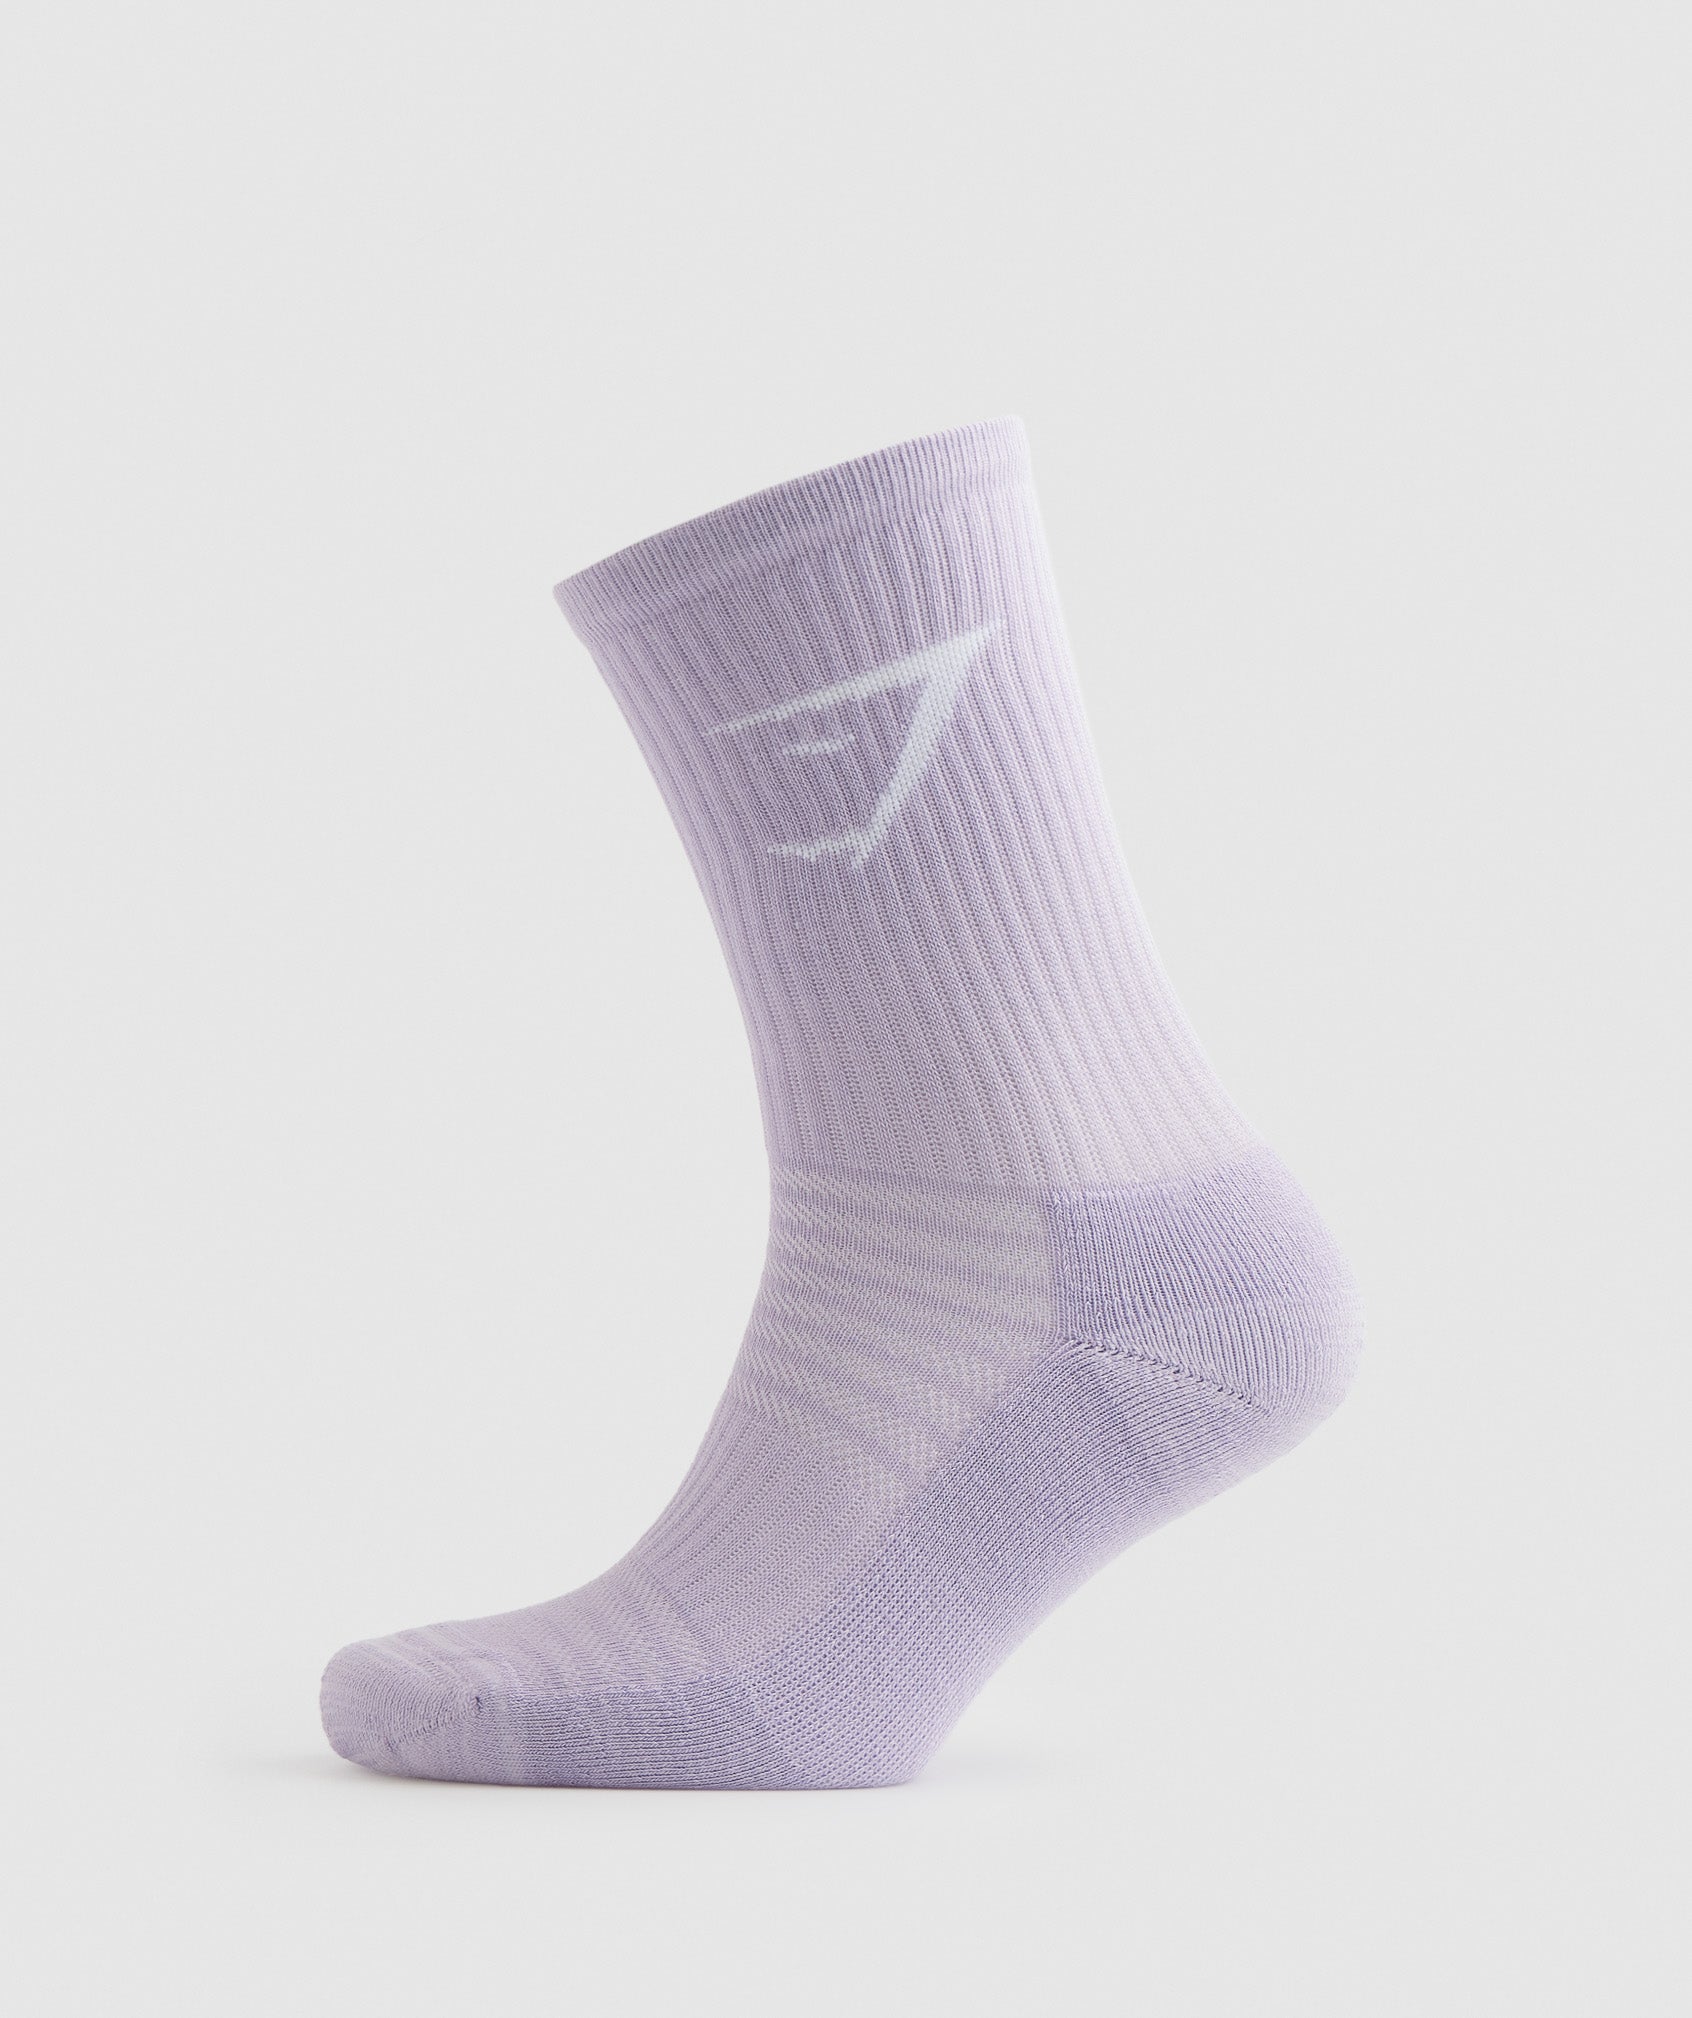 Crew Socks 3pk in Faded Lilac/Lavender Blue/Cucumber Green - view 3